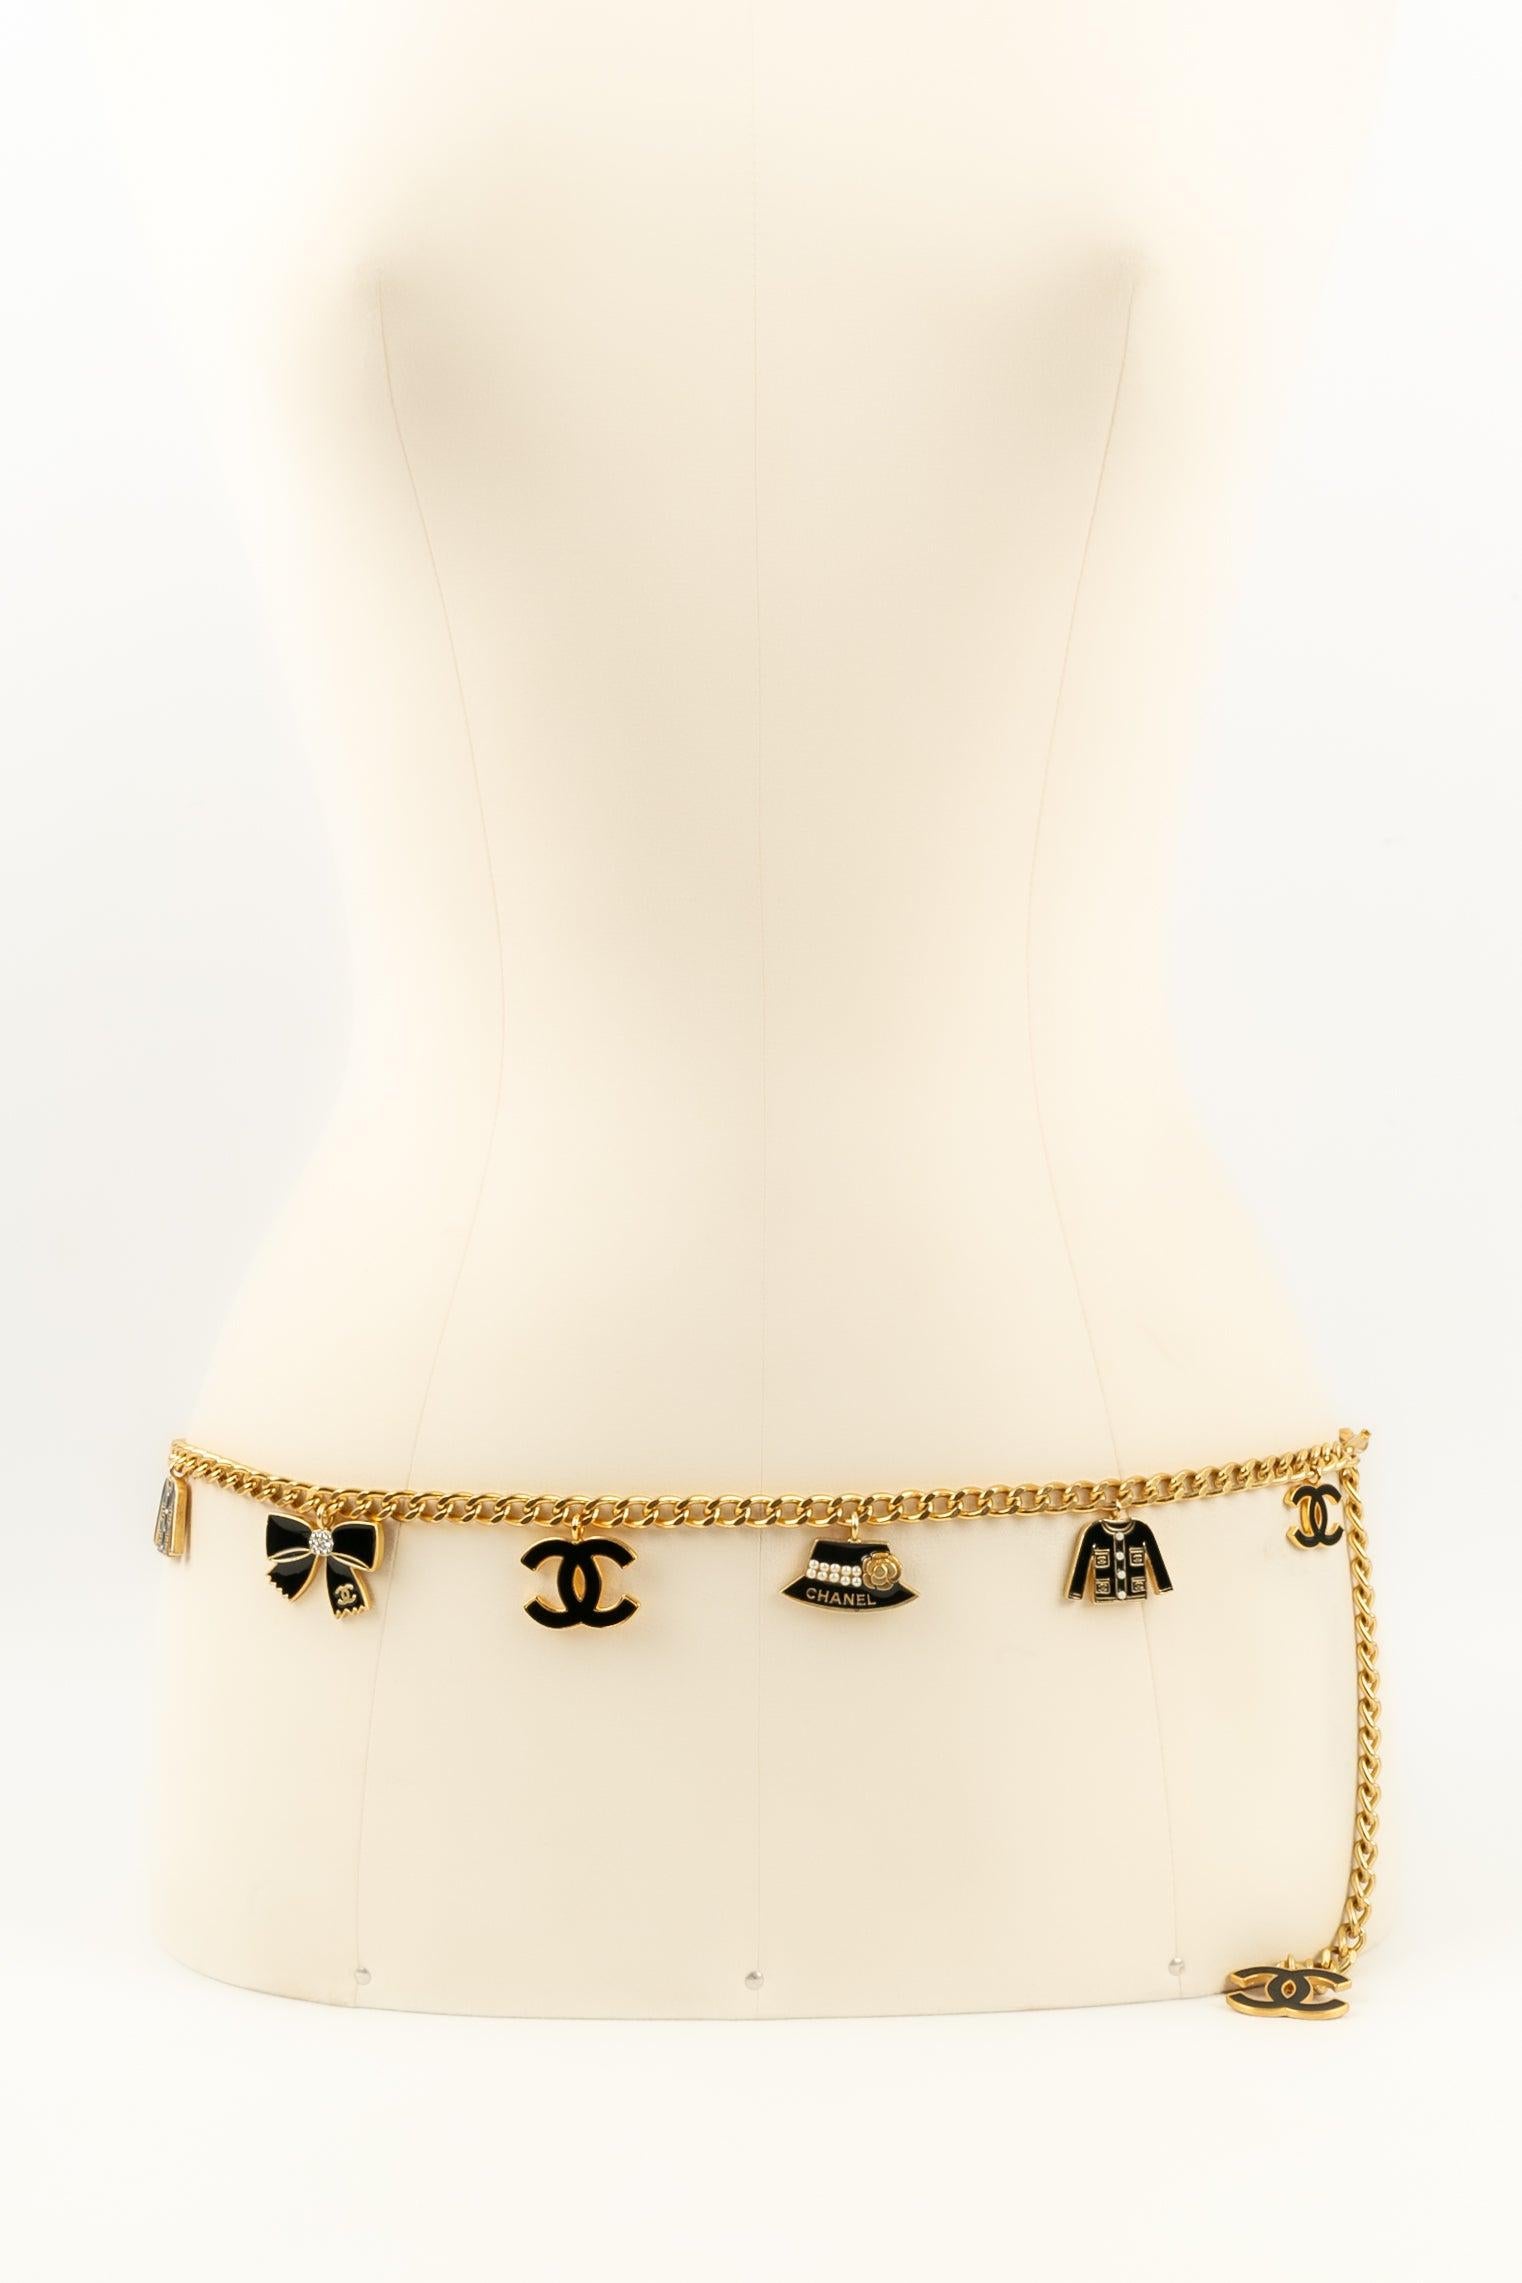 Chanel Long Necklace in Gold-Plated Metal and Charms, 2002 For Sale 6